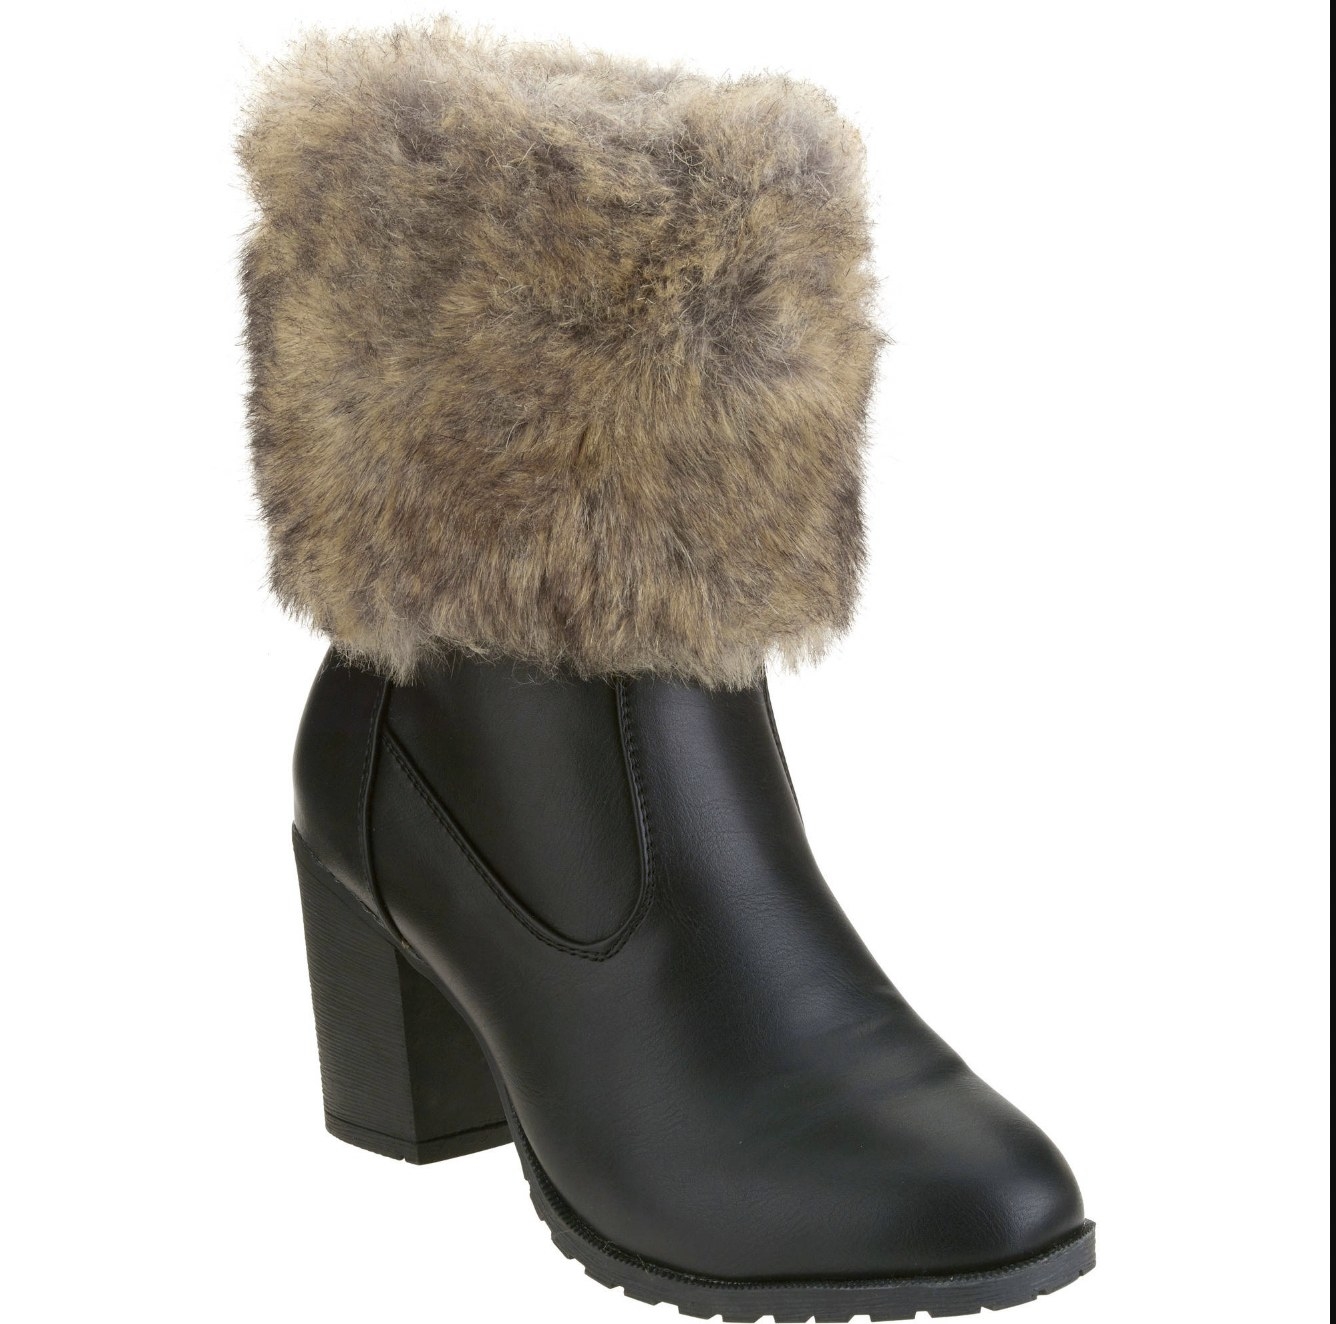 A black heeled boot with brown fur lining